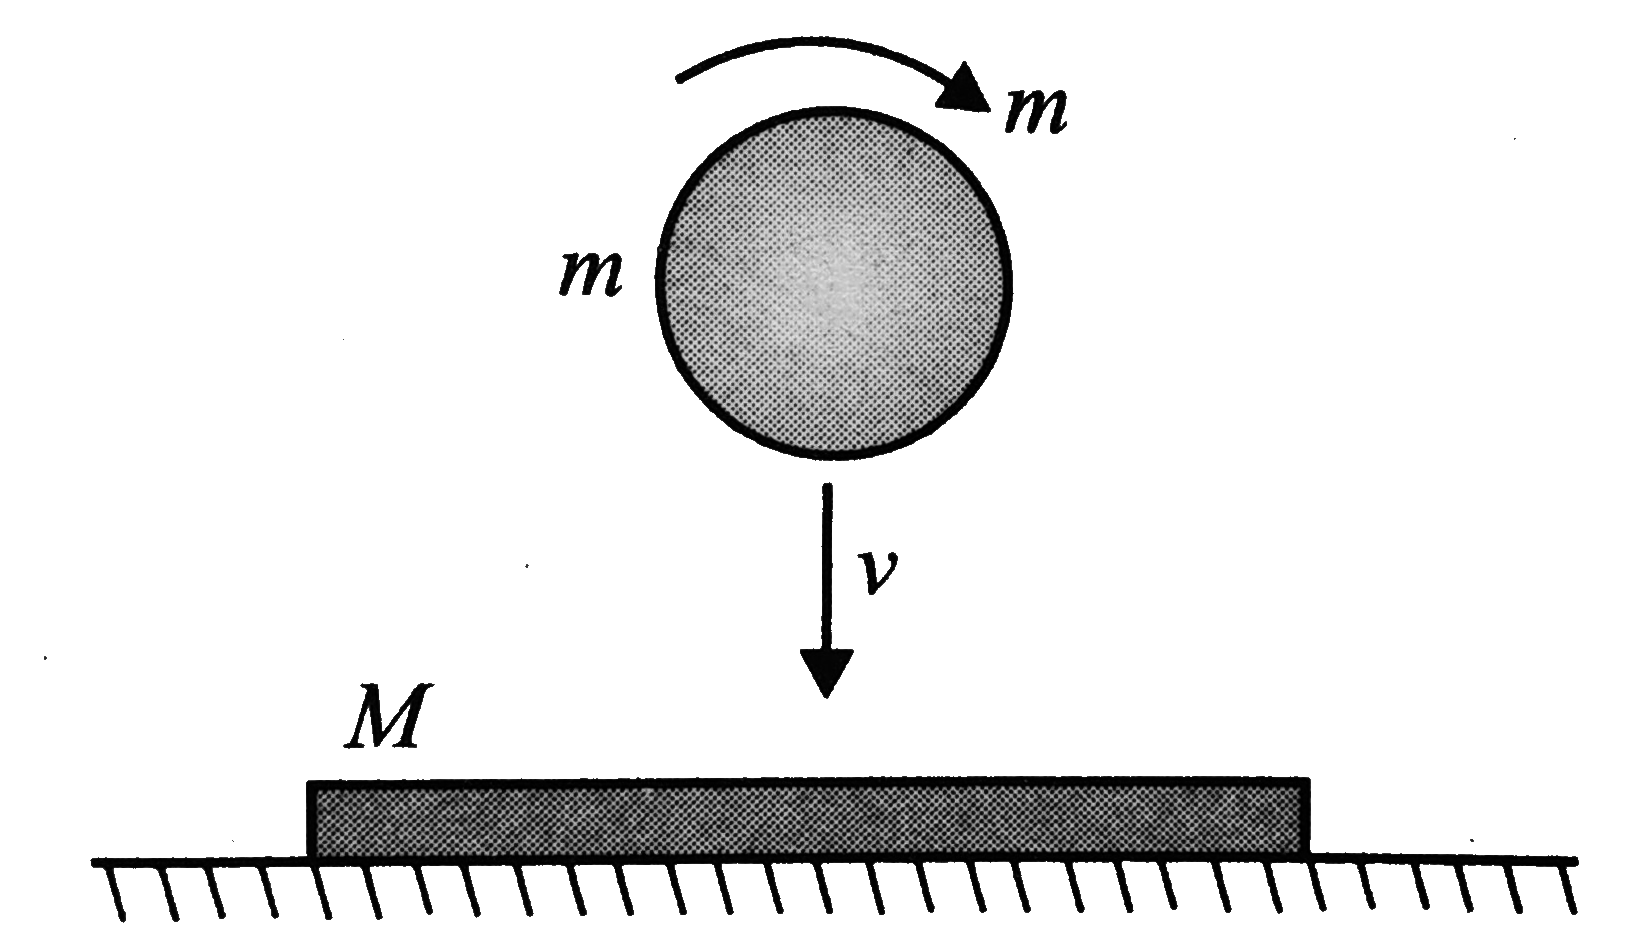 A solid ball of mass m and radius r spinning with angular velocity omega falls on a horizontal slab of mass M with rough upper surface (coefficient of friction mu) and smooth lower surface. Immediately after collision the normal component of velocity of the ball remains half of its value just before collision and it stops spinning. Find the velocity of the sphere in horizontal direction immediately after the impact (given: Romega= 5).